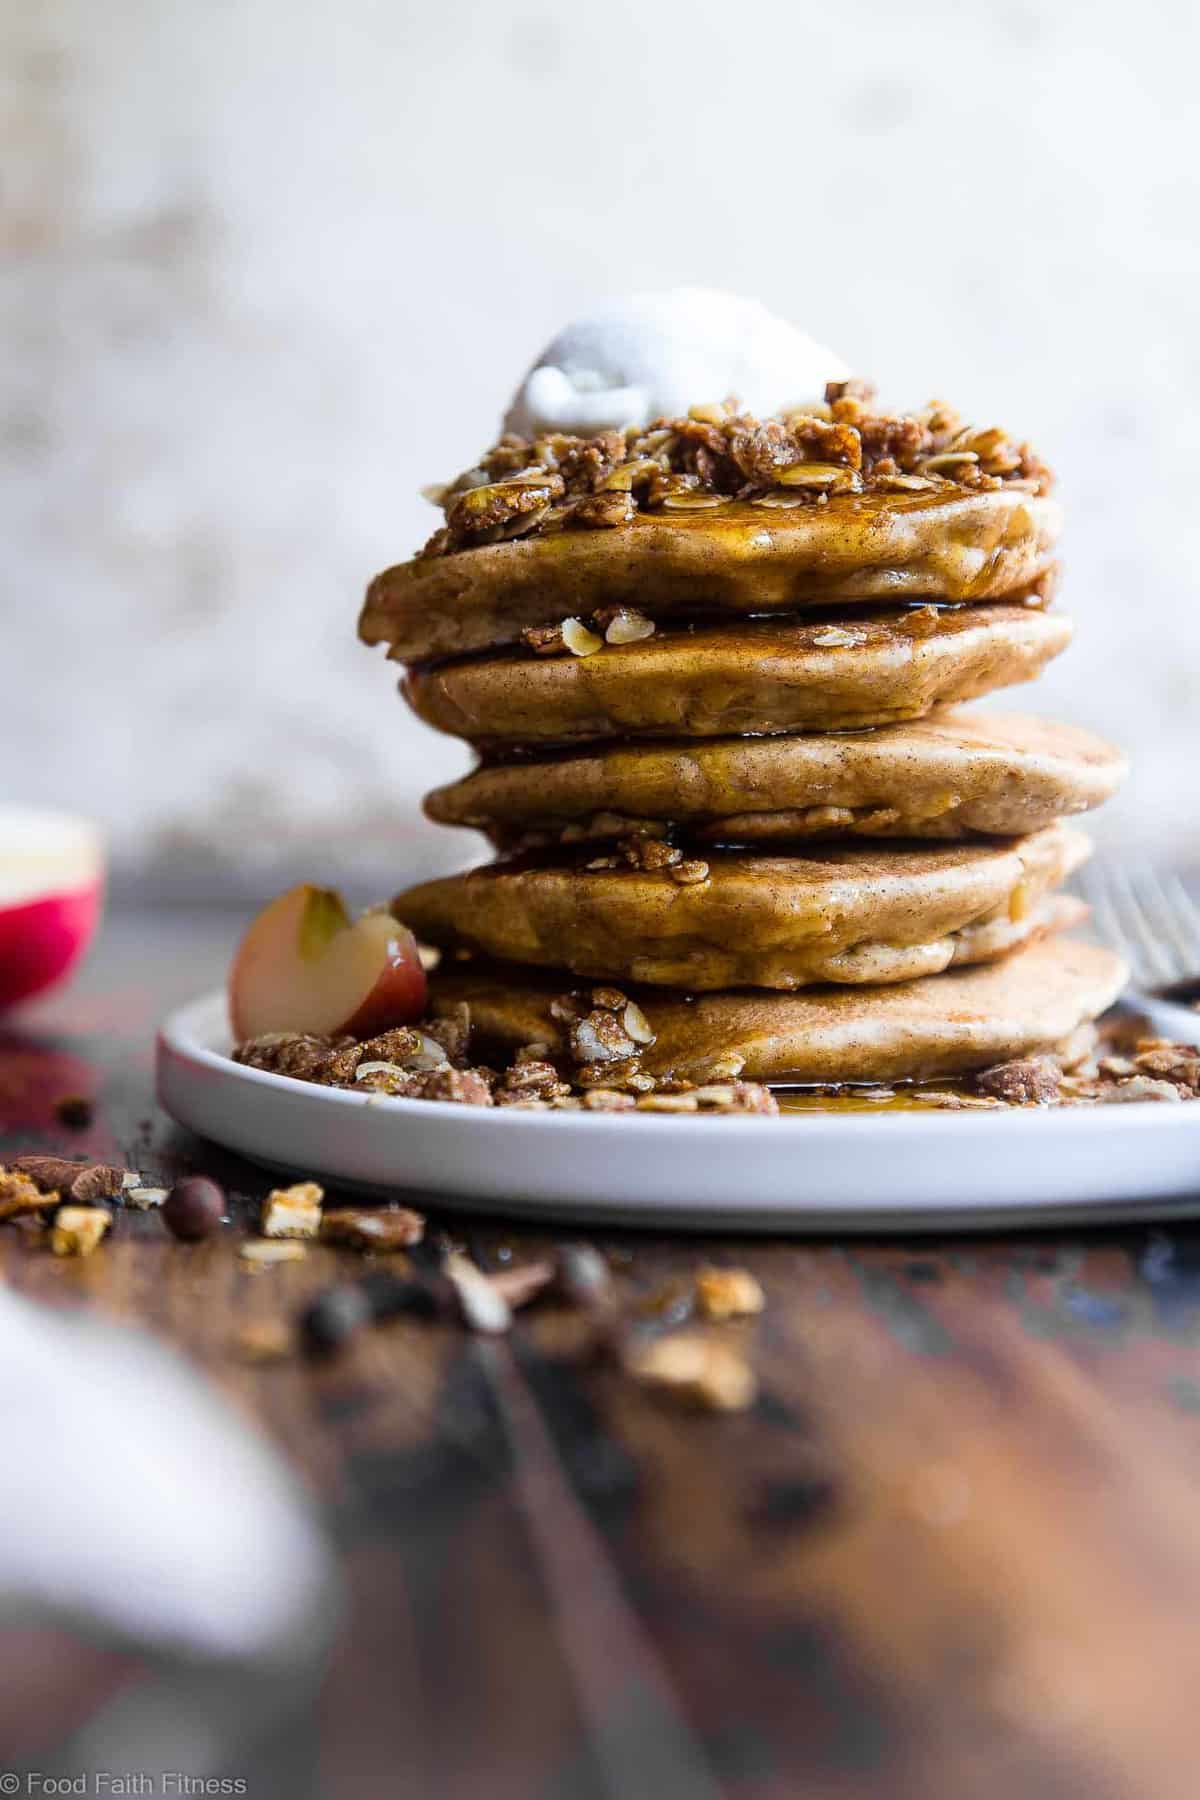 Apple Crisp Greek Yogurt Oatmeal Protein Pancakes - This Healthy easy Protein Pancake Recipe with Greek Yogurt taste like having apple crisp for breakfast! Gluten free, made from simple, wholesome ingredients and SO thick and fluffy! | #Foodfaithfitness | #Glutenfree #Dairyfree #Greekyogurt #Healthy #Pancakes